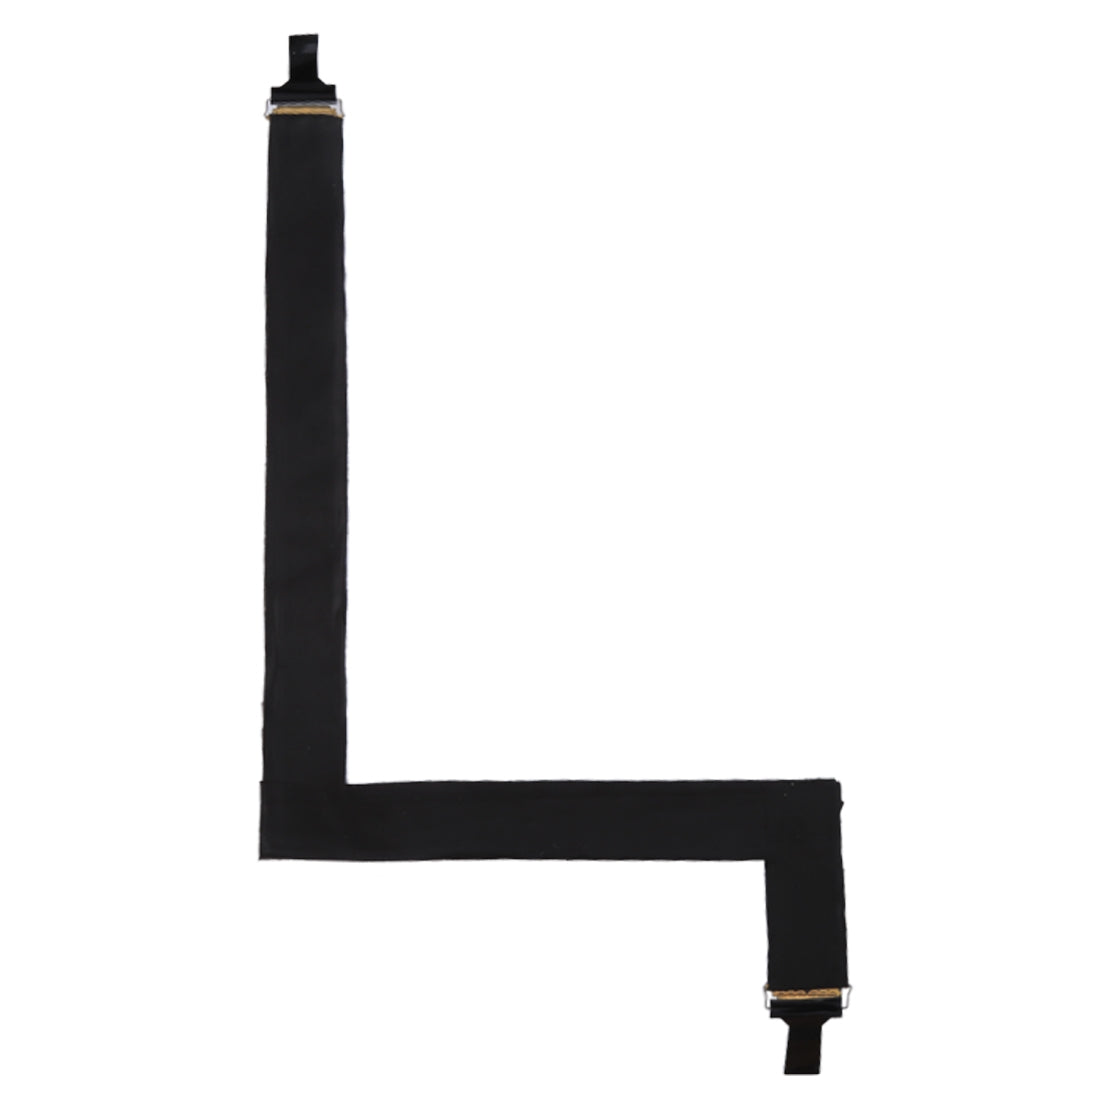 LCD Connector Flex Cable Apple iMac 27 A1312 2011